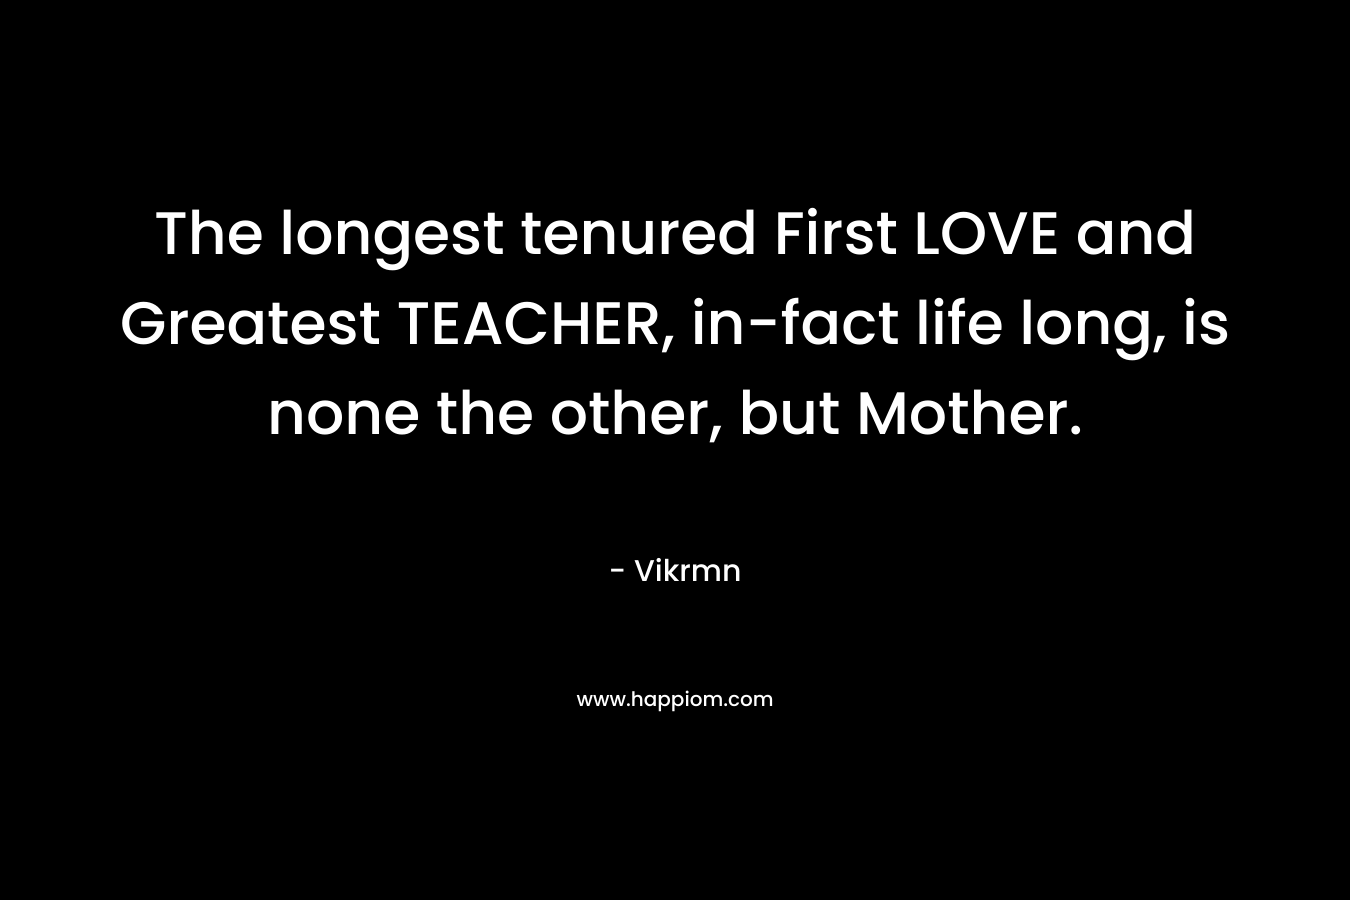 The longest tenured First LOVE and Greatest TEACHER, in-fact life long, is none the other, but Mother.